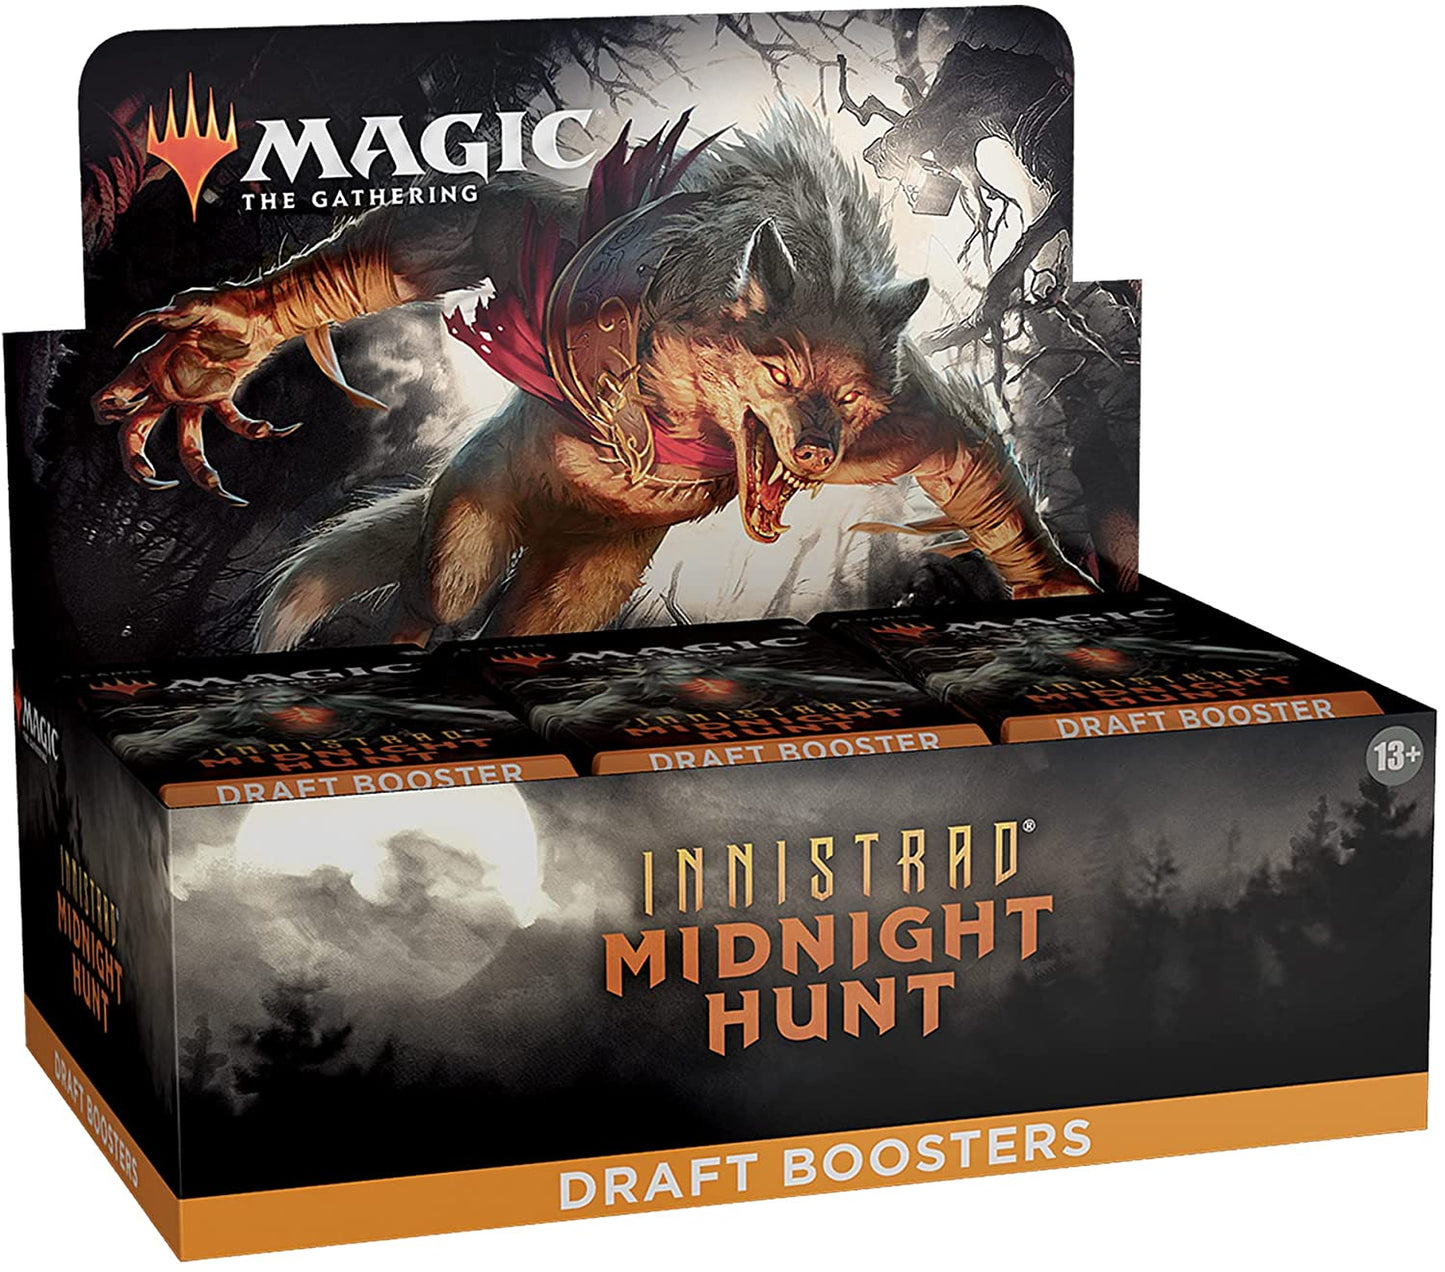 Magic: The Gathering Draft Booster Box Case - Innistrad: Midnight Hunt (Case of 6)